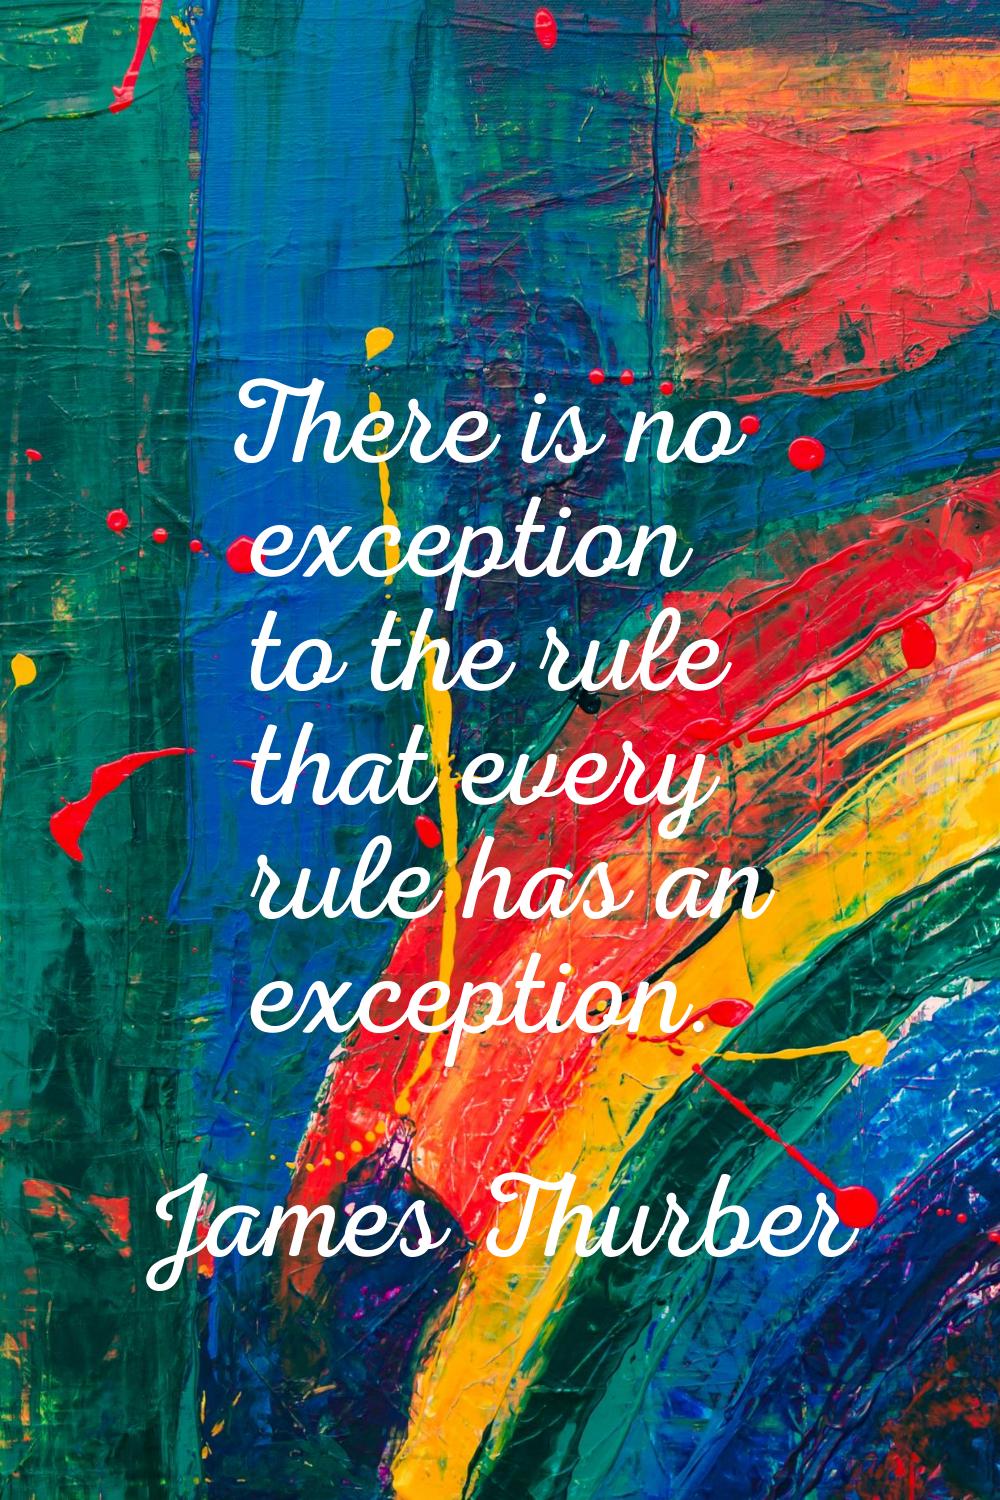 There is no exception to the rule that every rule has an exception.